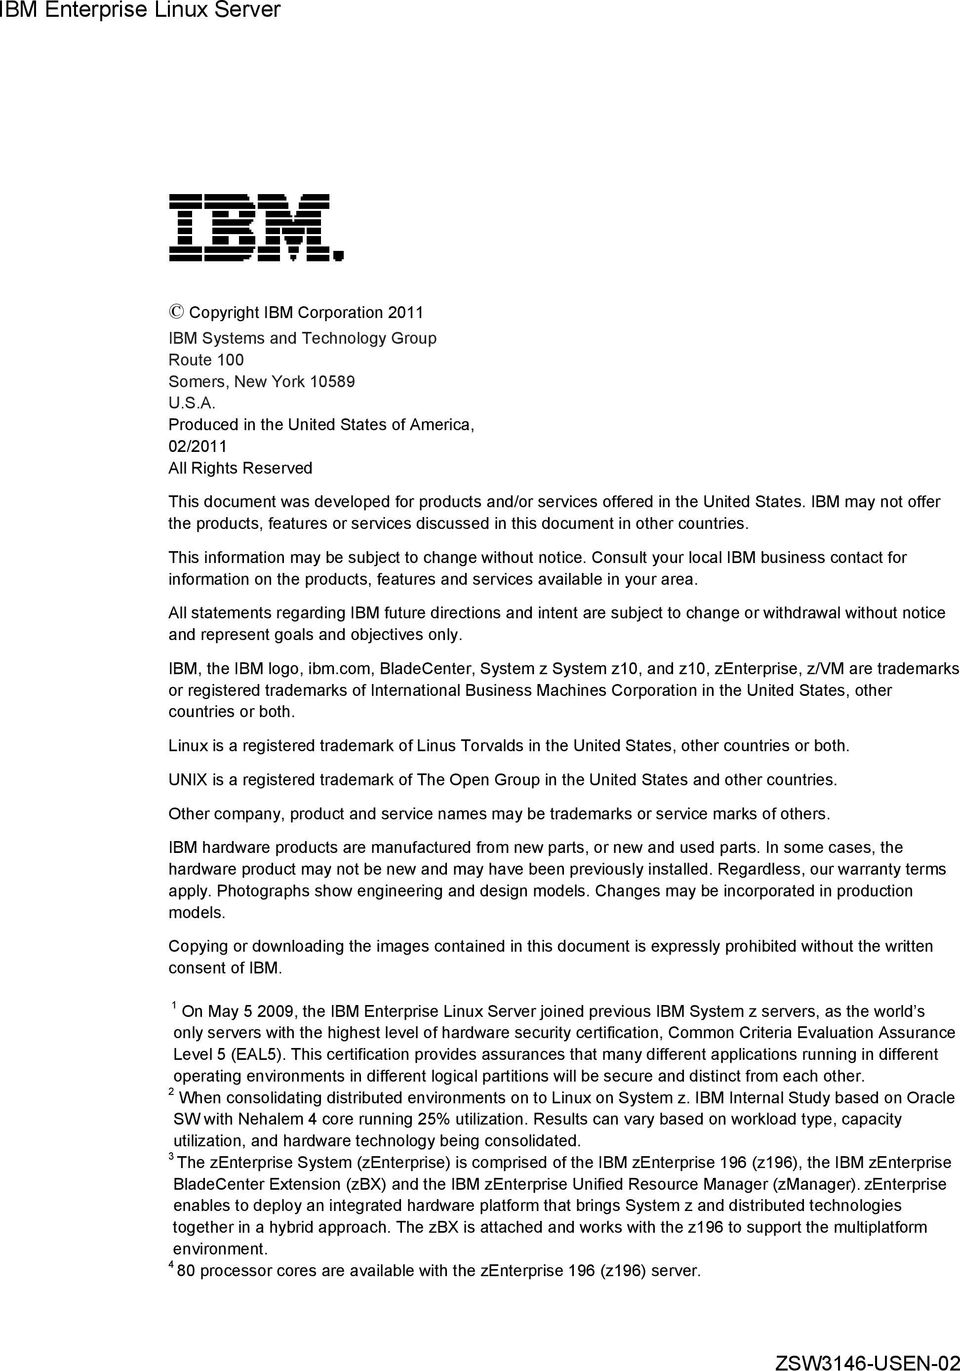 IBM may not offer the products, features or services discussed in this document in other countries. This information may be subject to change without notice.